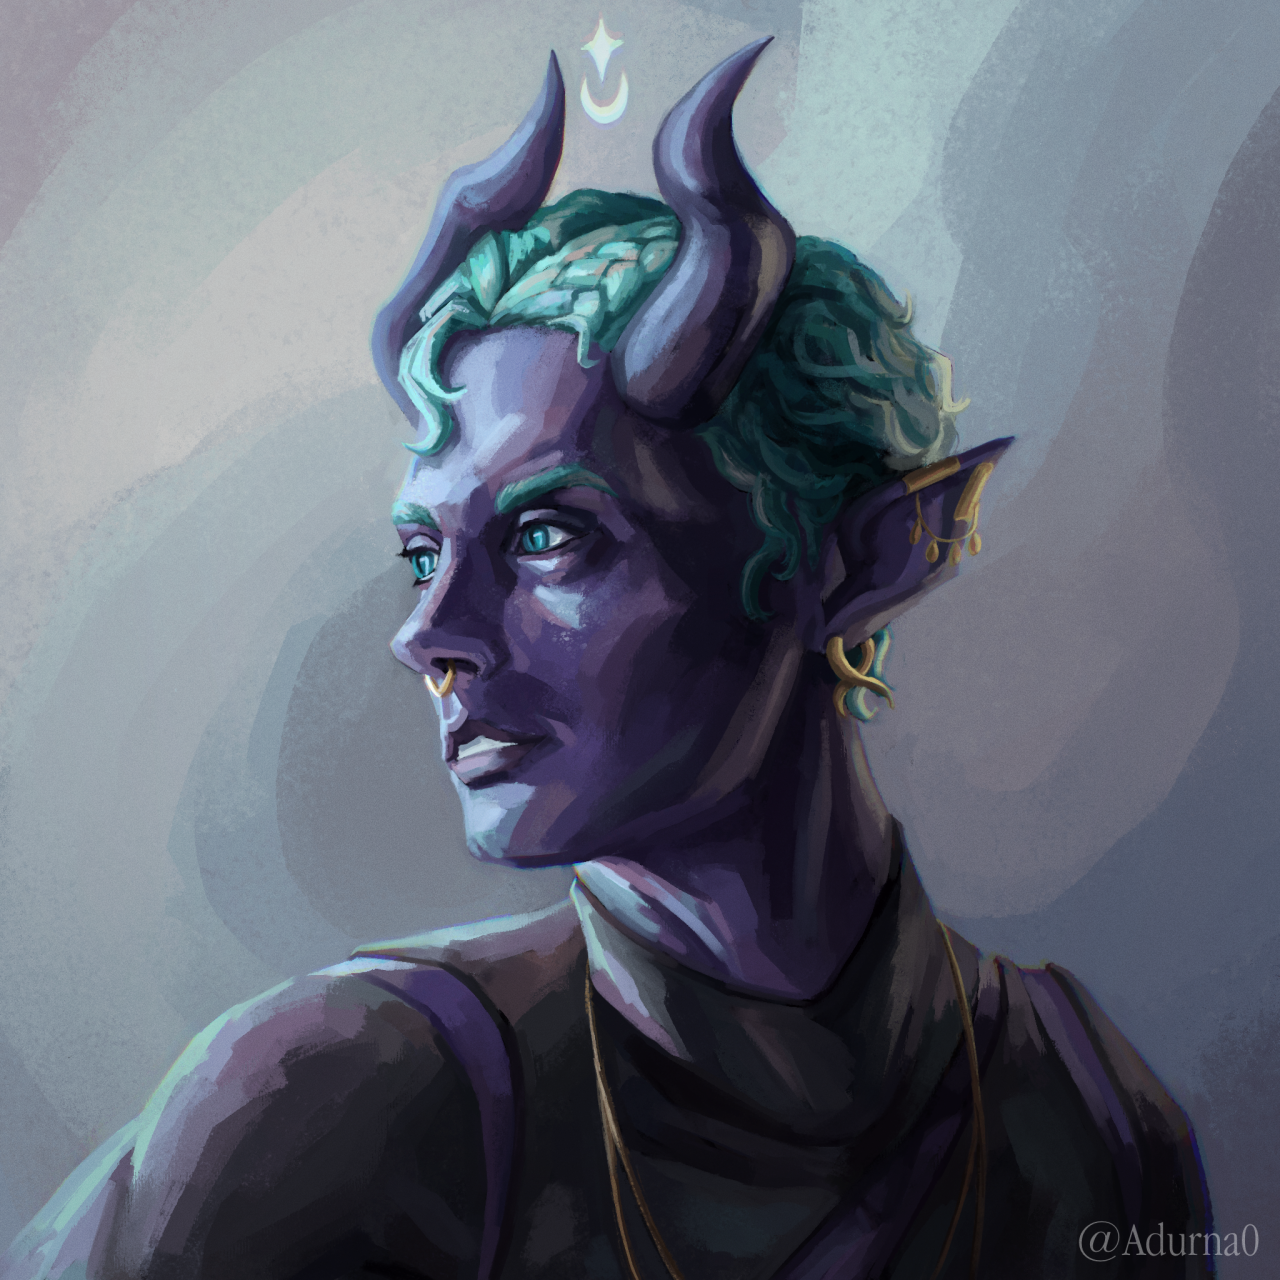 lolthies / comms open on X: Portrait practice with Poska! 🥰 #exu  #exandriaunlimited #criticalrole #criticalrolefanart  #exandriaunlimitedfanart #dnd #dnd5e  / X